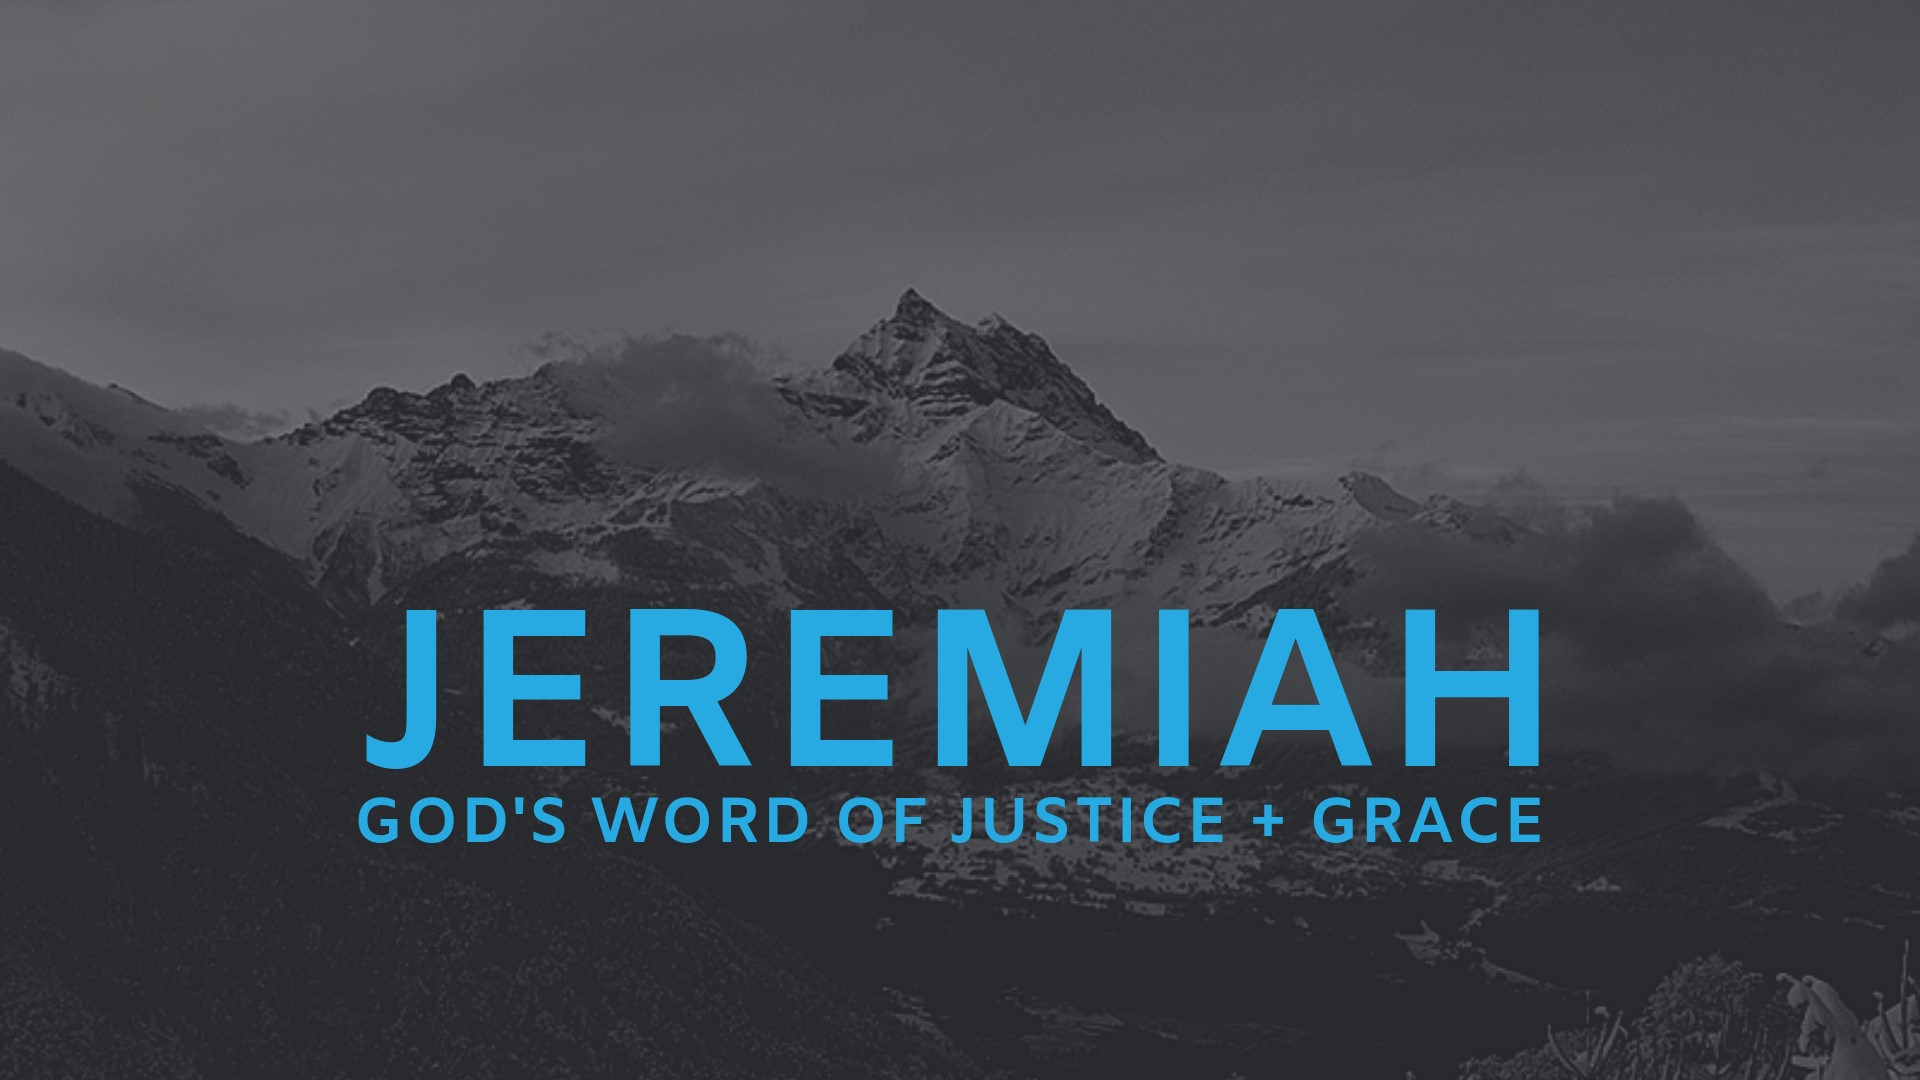 The book of Jeremiah